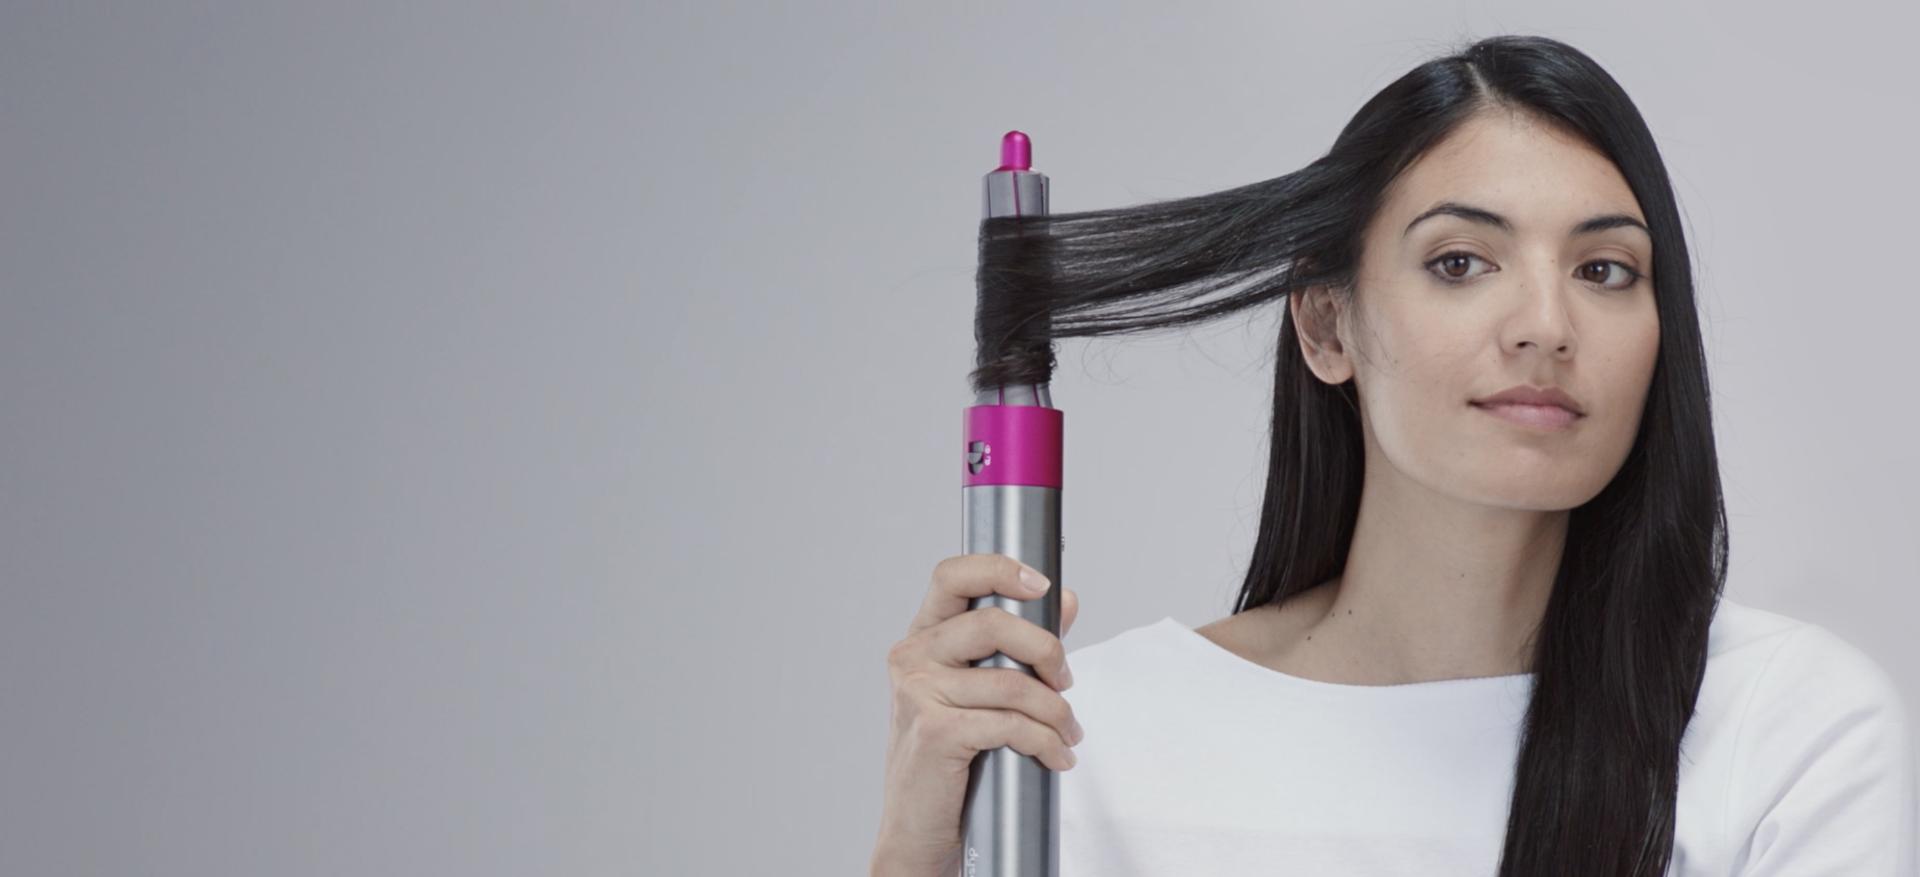 Video showing how to get started with your Dyson Airwrap multi-styler